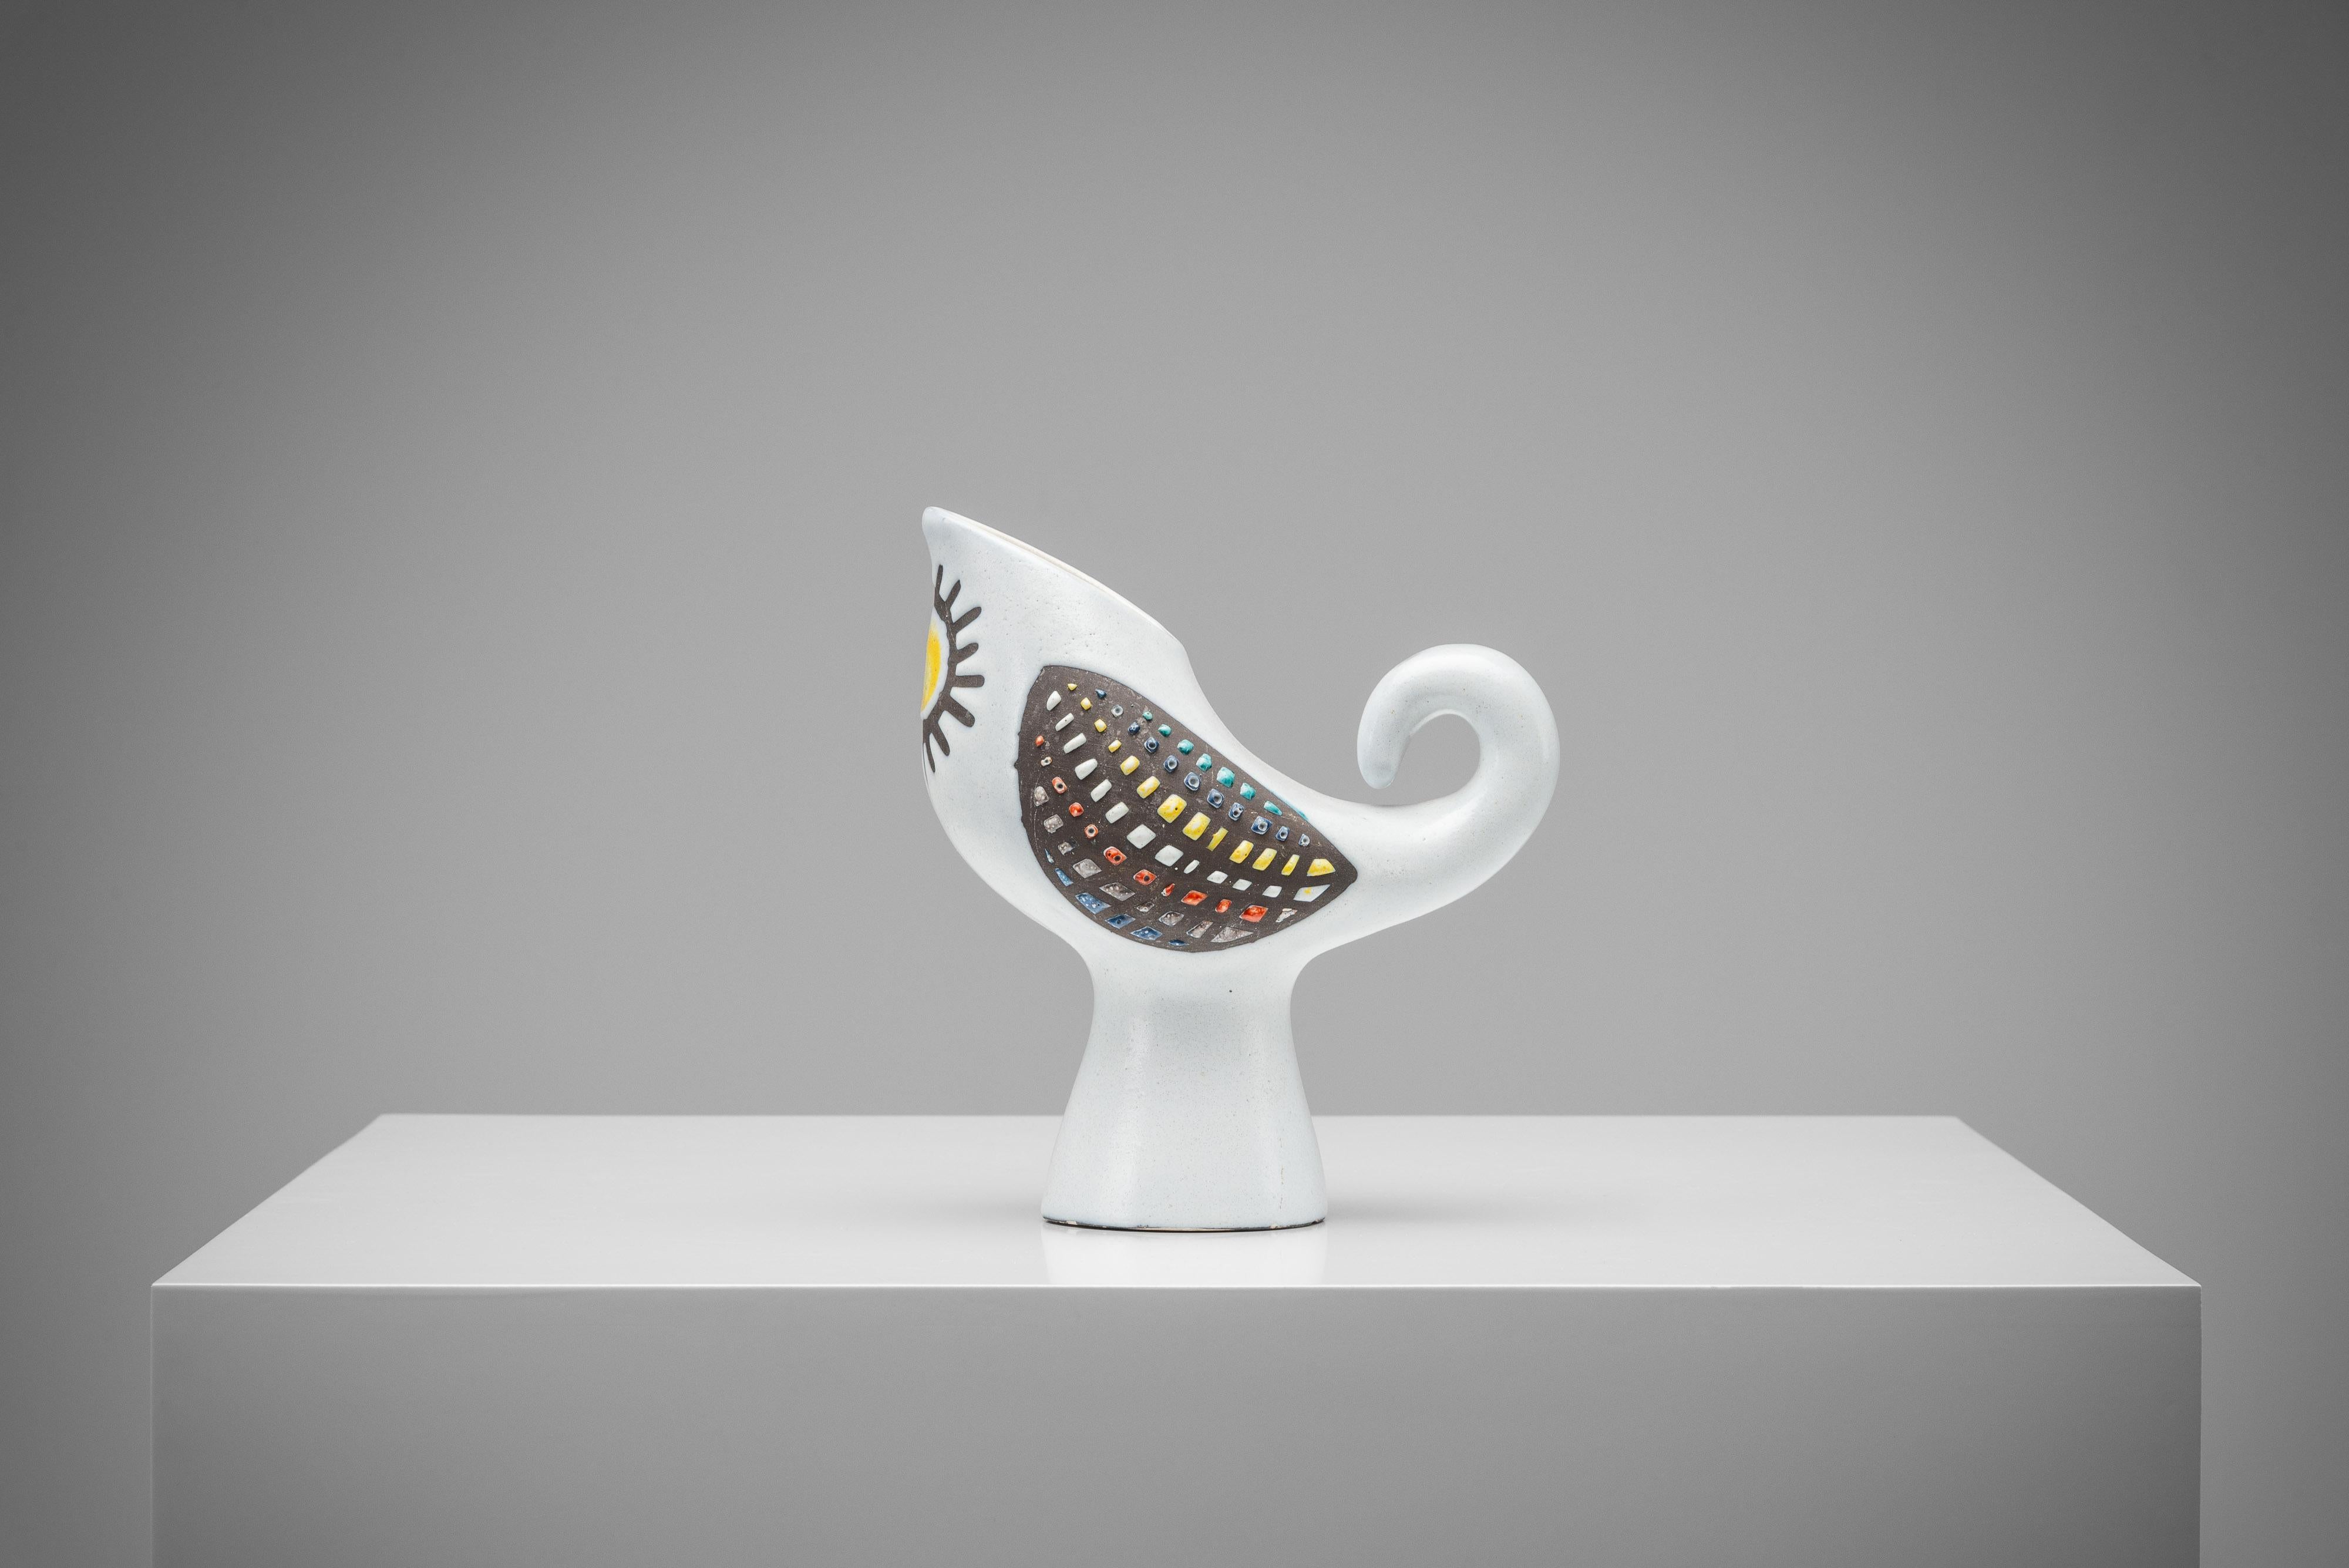 This ceramic pitcher is a special creation by Roger Capron and made in France in 1960. It's shaped like an abstract bird or rooster and was made in the 1960s. It has a surprising design with a soft white glaze and colourful, tile-like wings. This